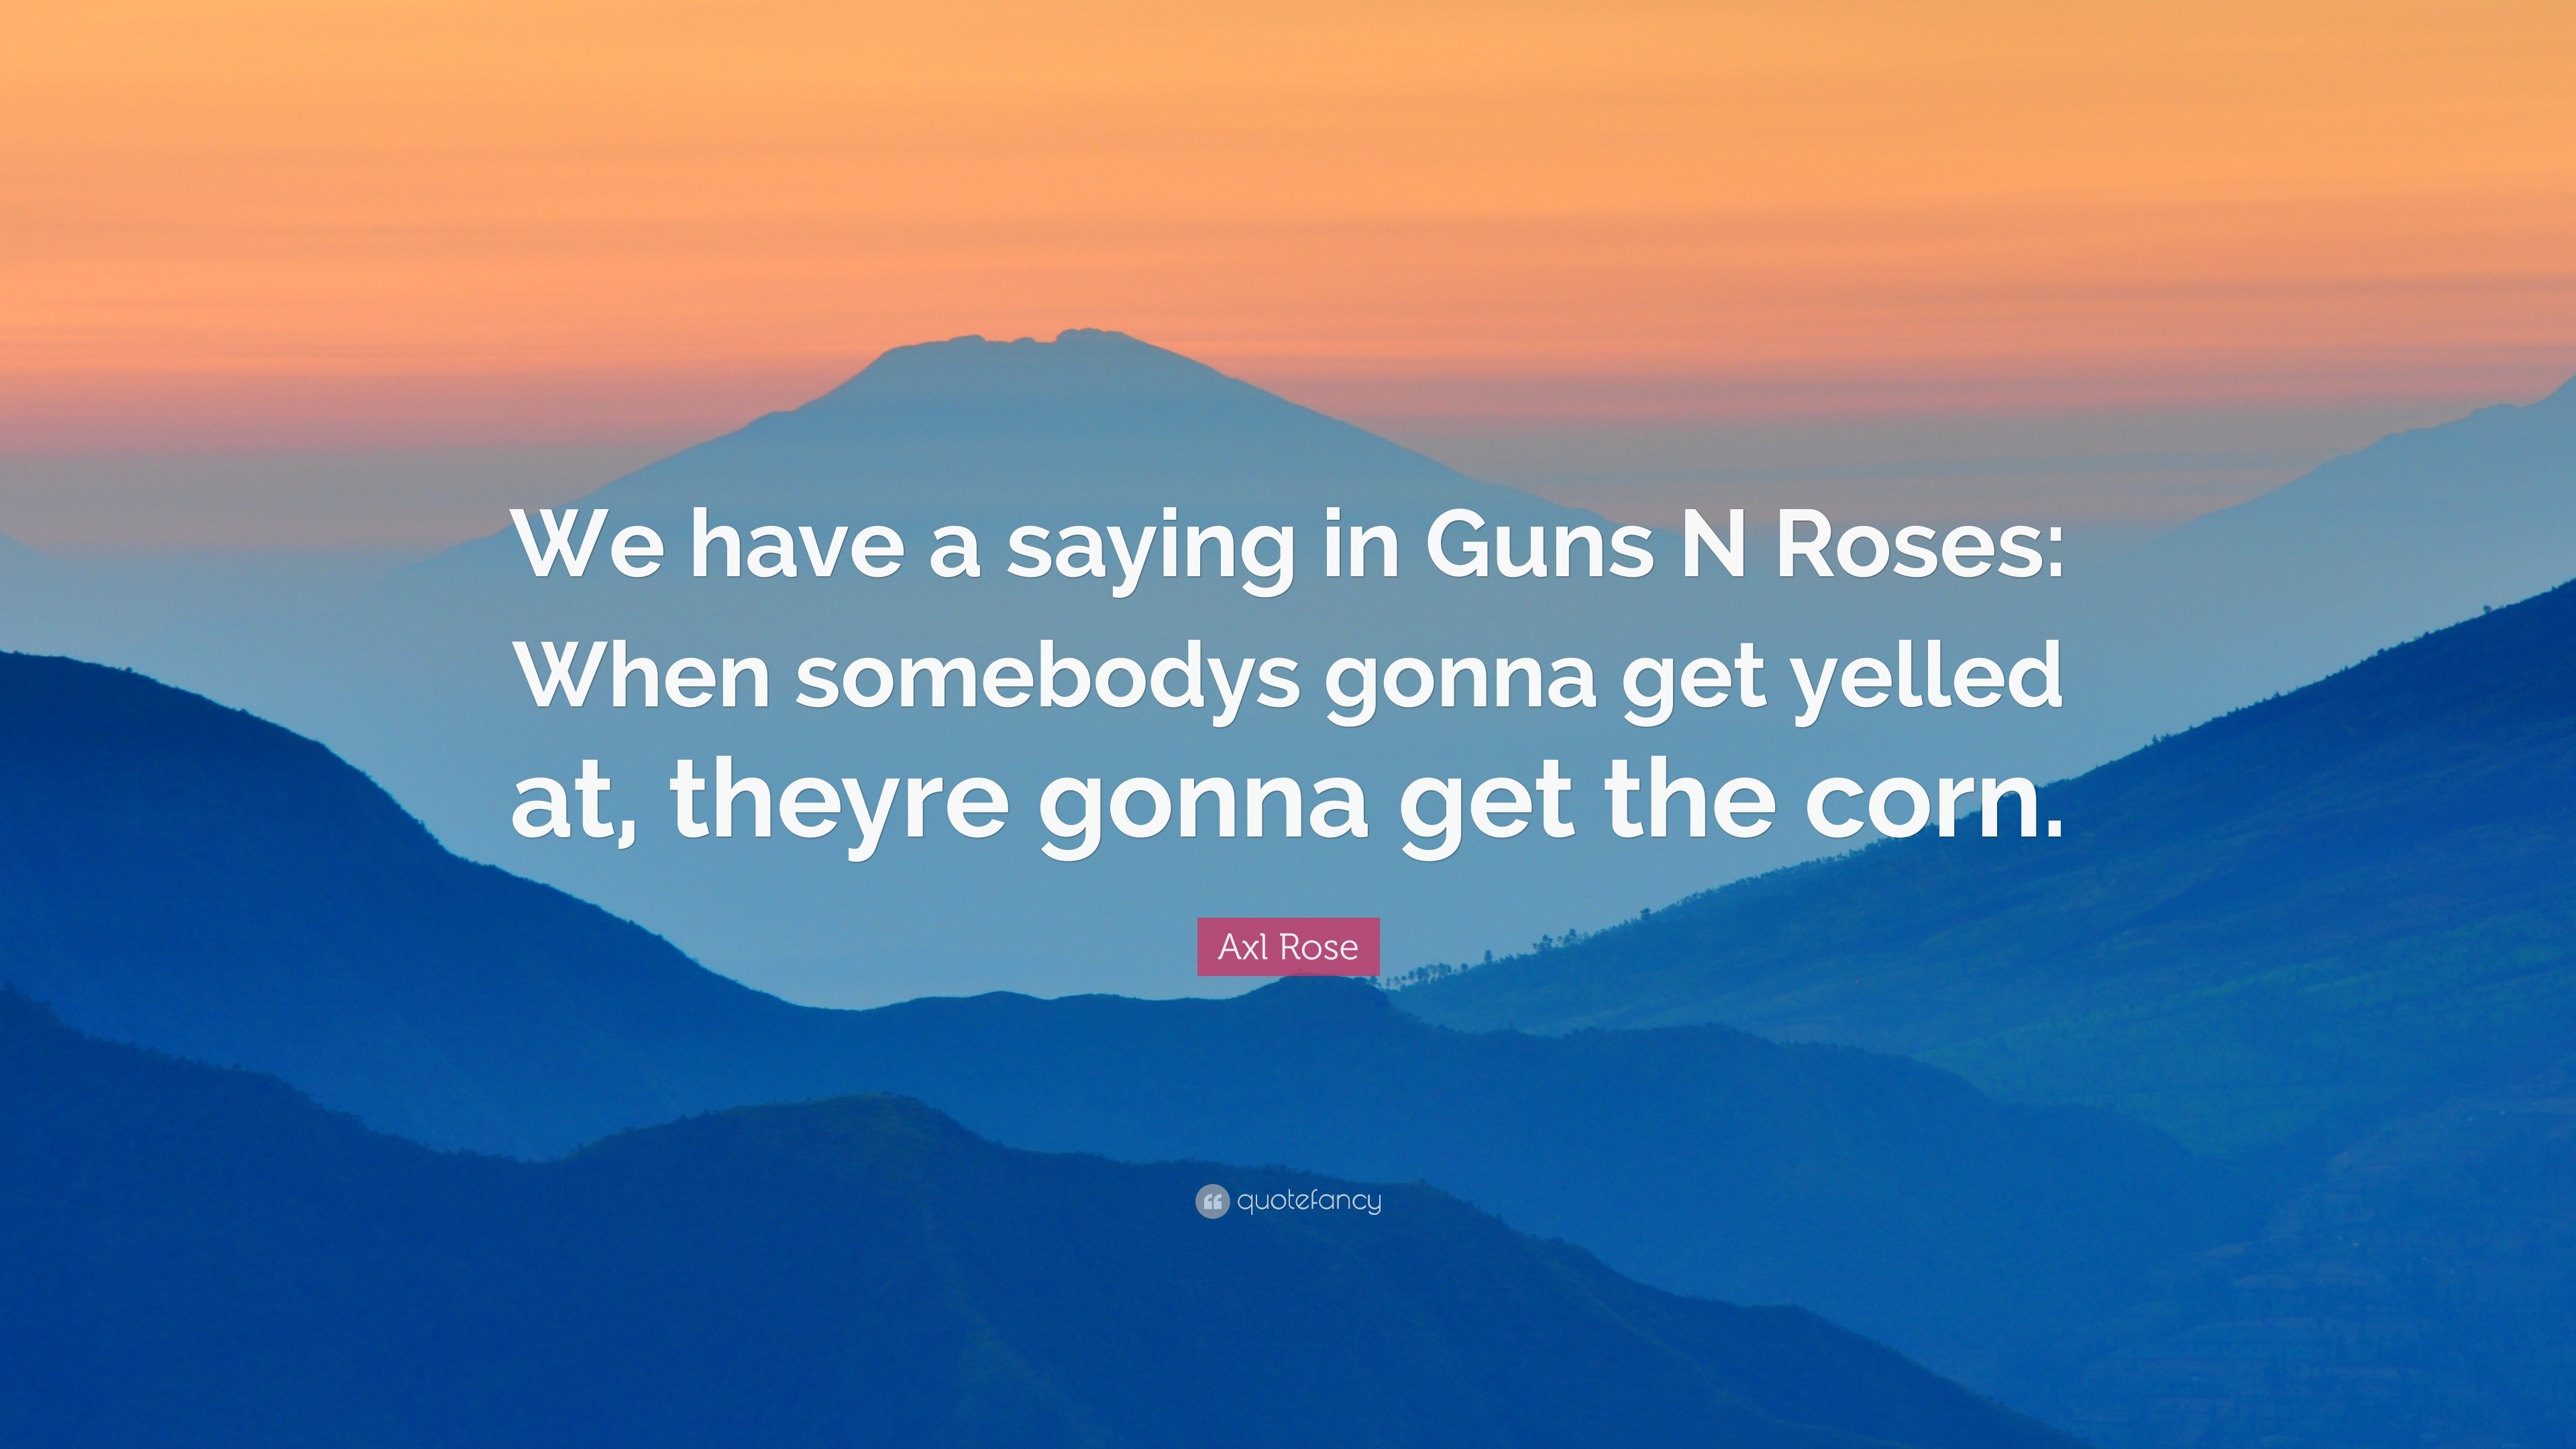 Axl Rose Quotes (34 wallpapers) - Quotefancy